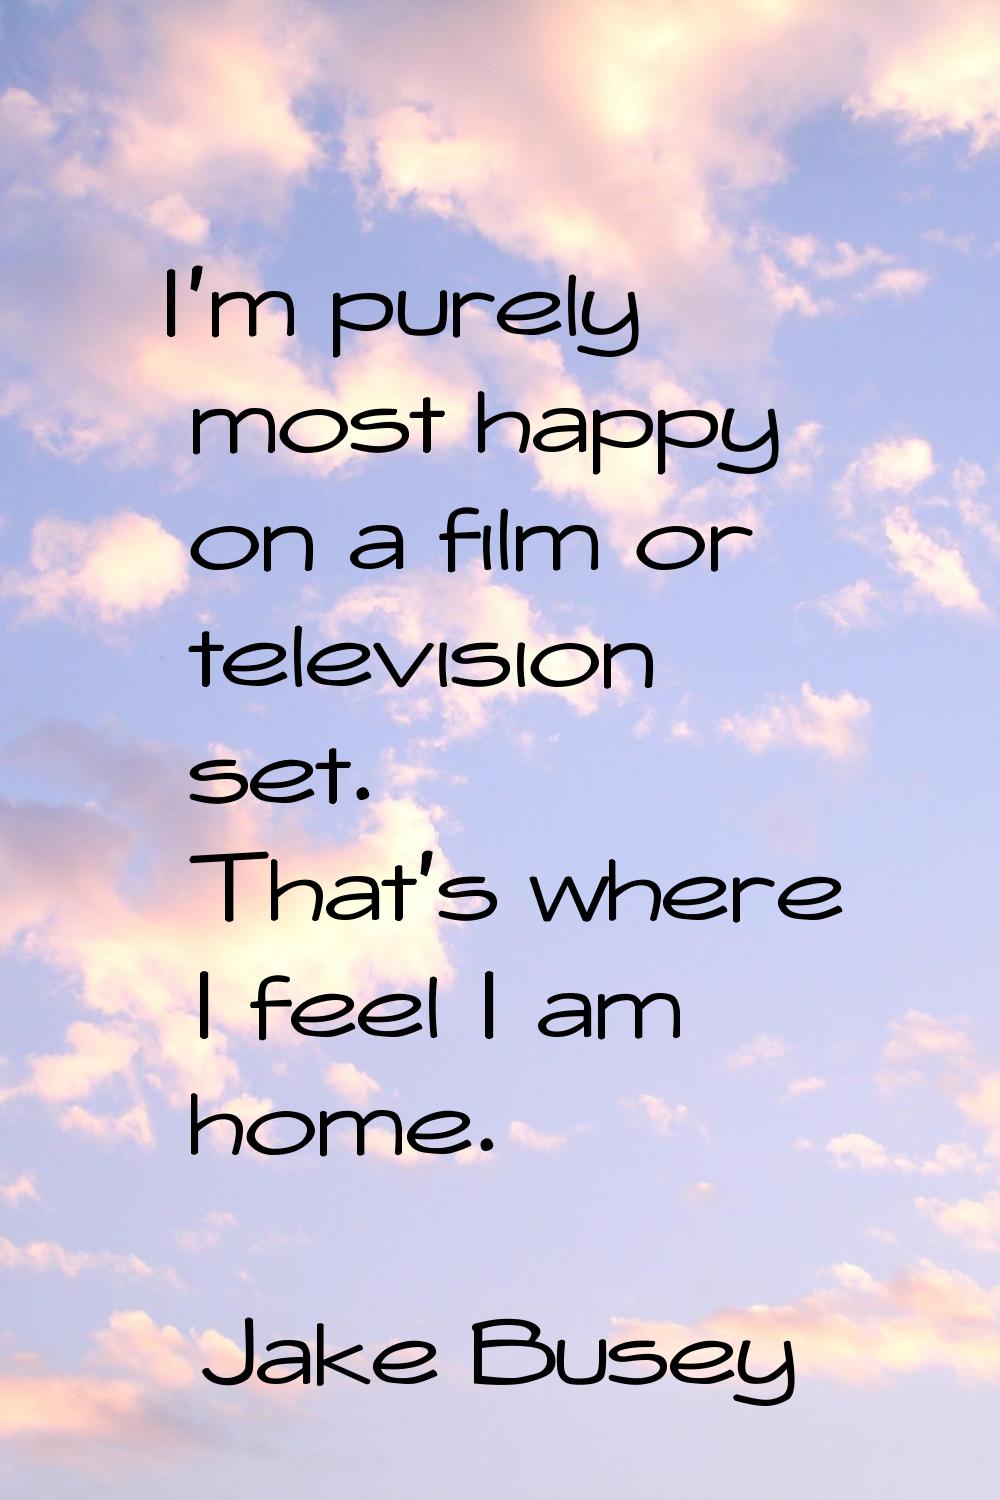 I'm purely most happy on a film or television set. That's where I feel I am home.